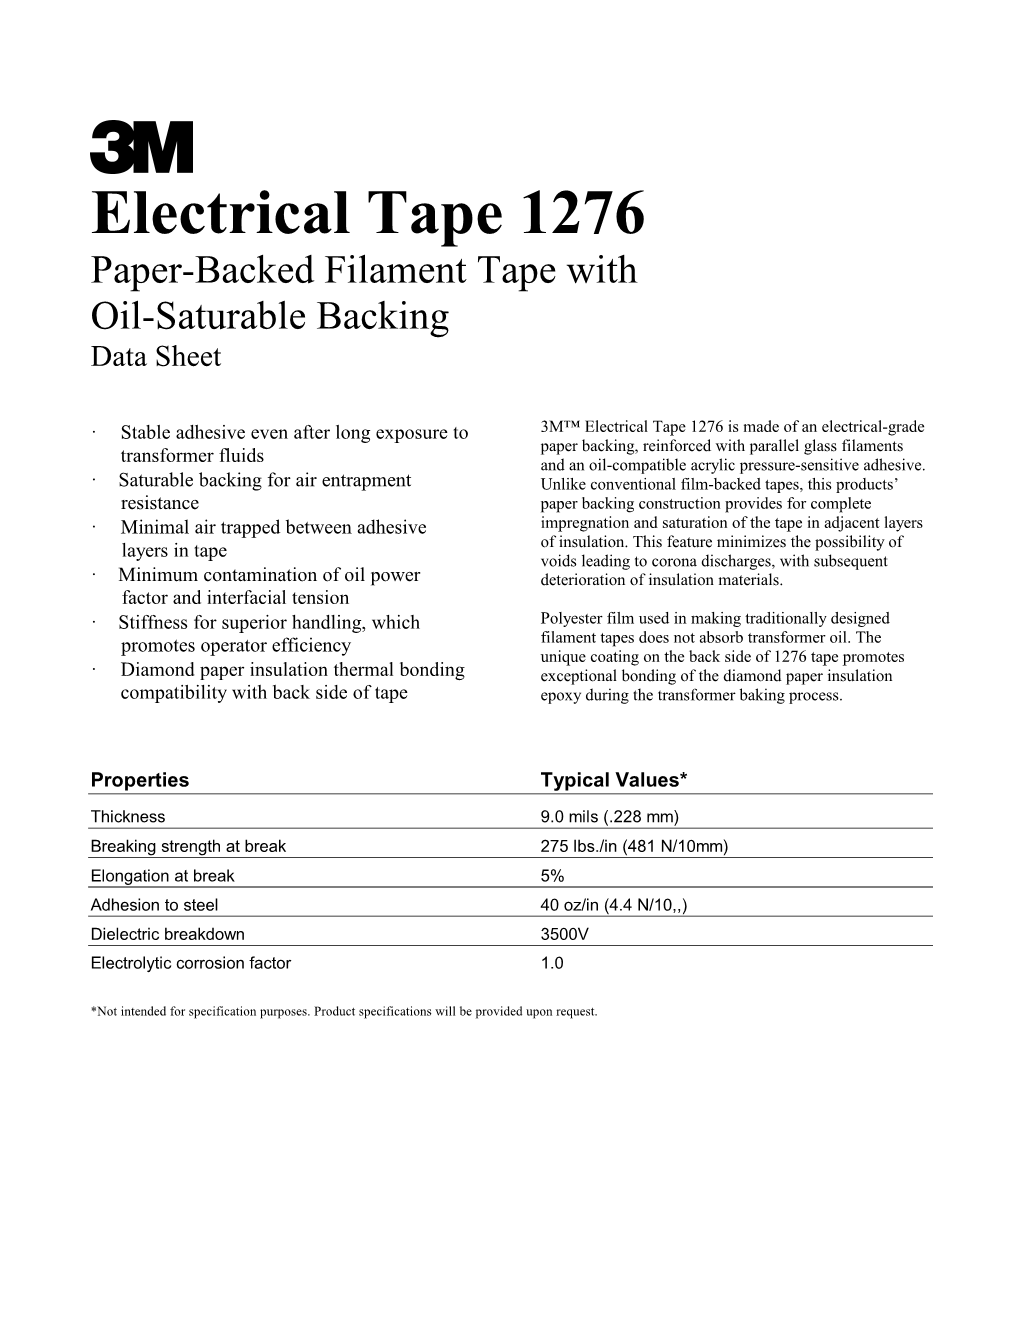 Electrical Tape 1276 Paper-Backed Filament Tape with Oil-Saturable Backing Data Sheet